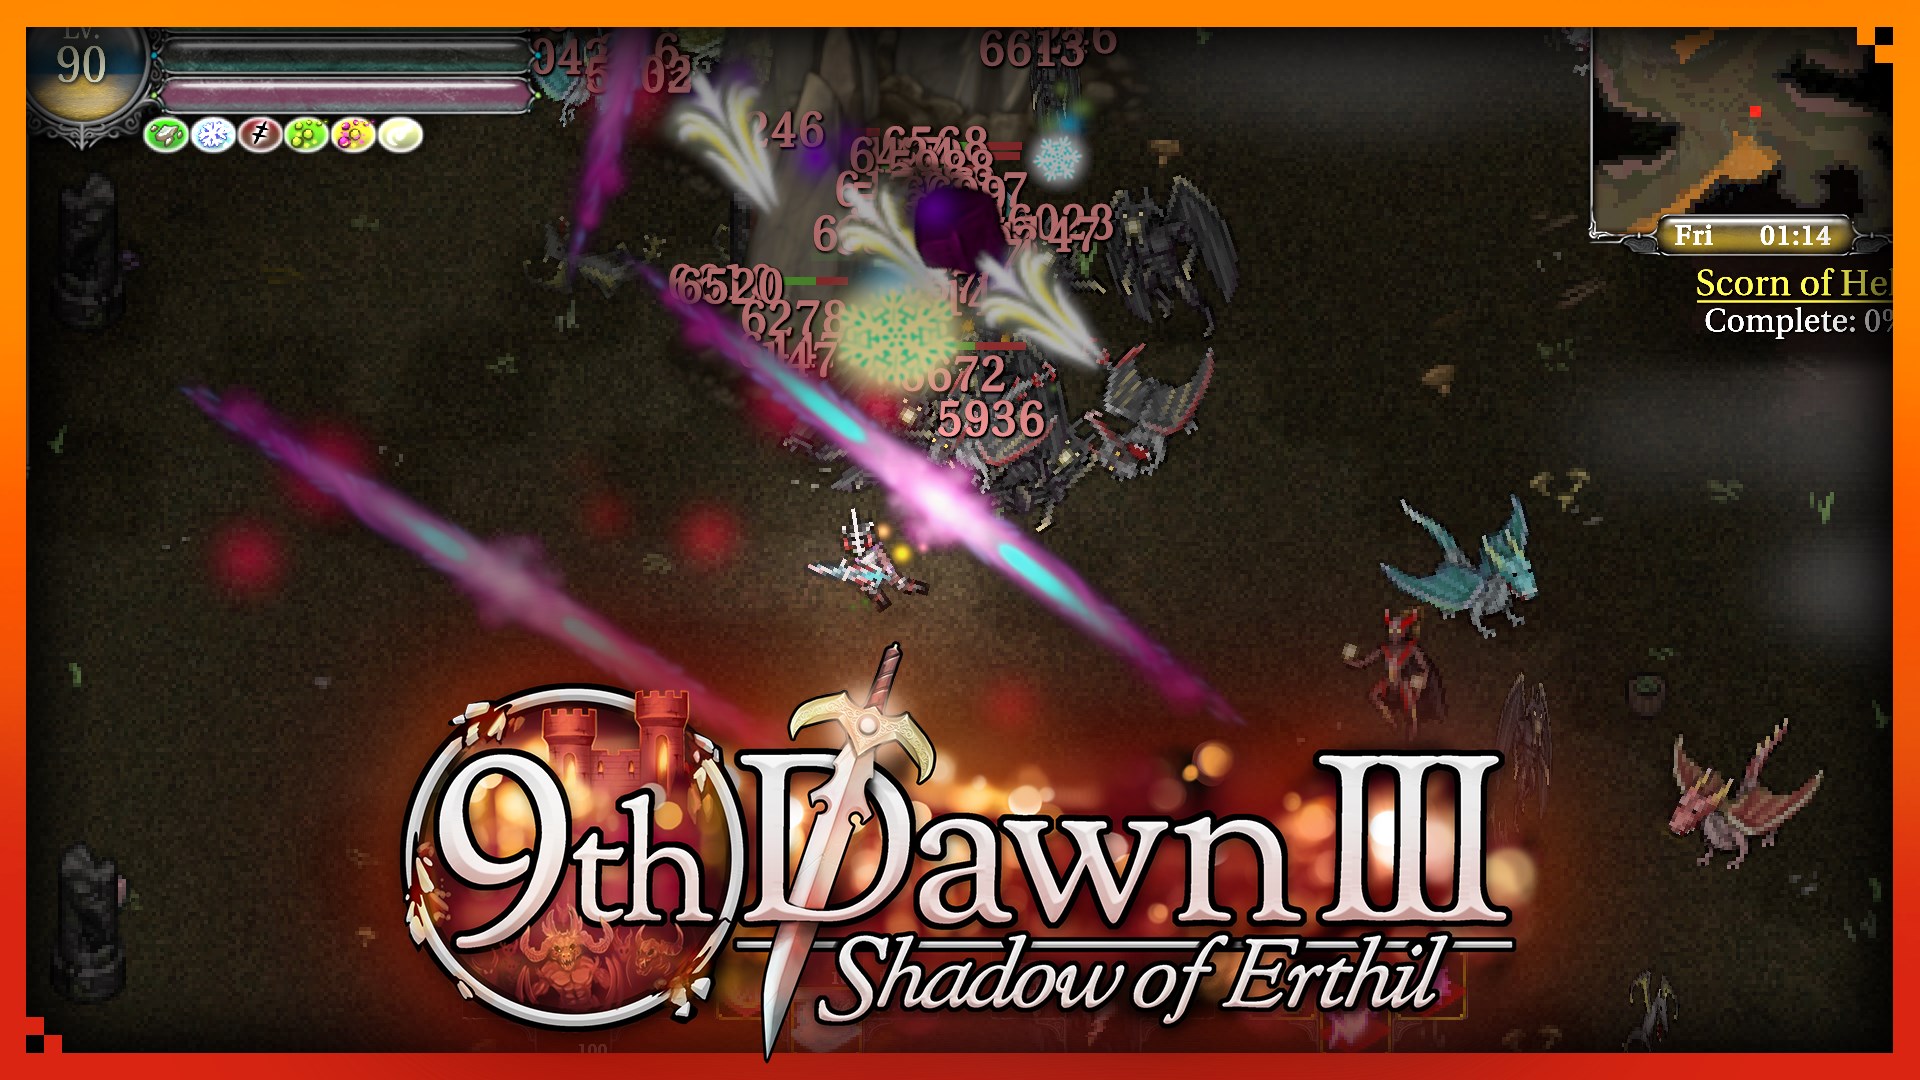 9th Dawn III: Shadow of Erthil  PlayStation 4 - Limited Game News